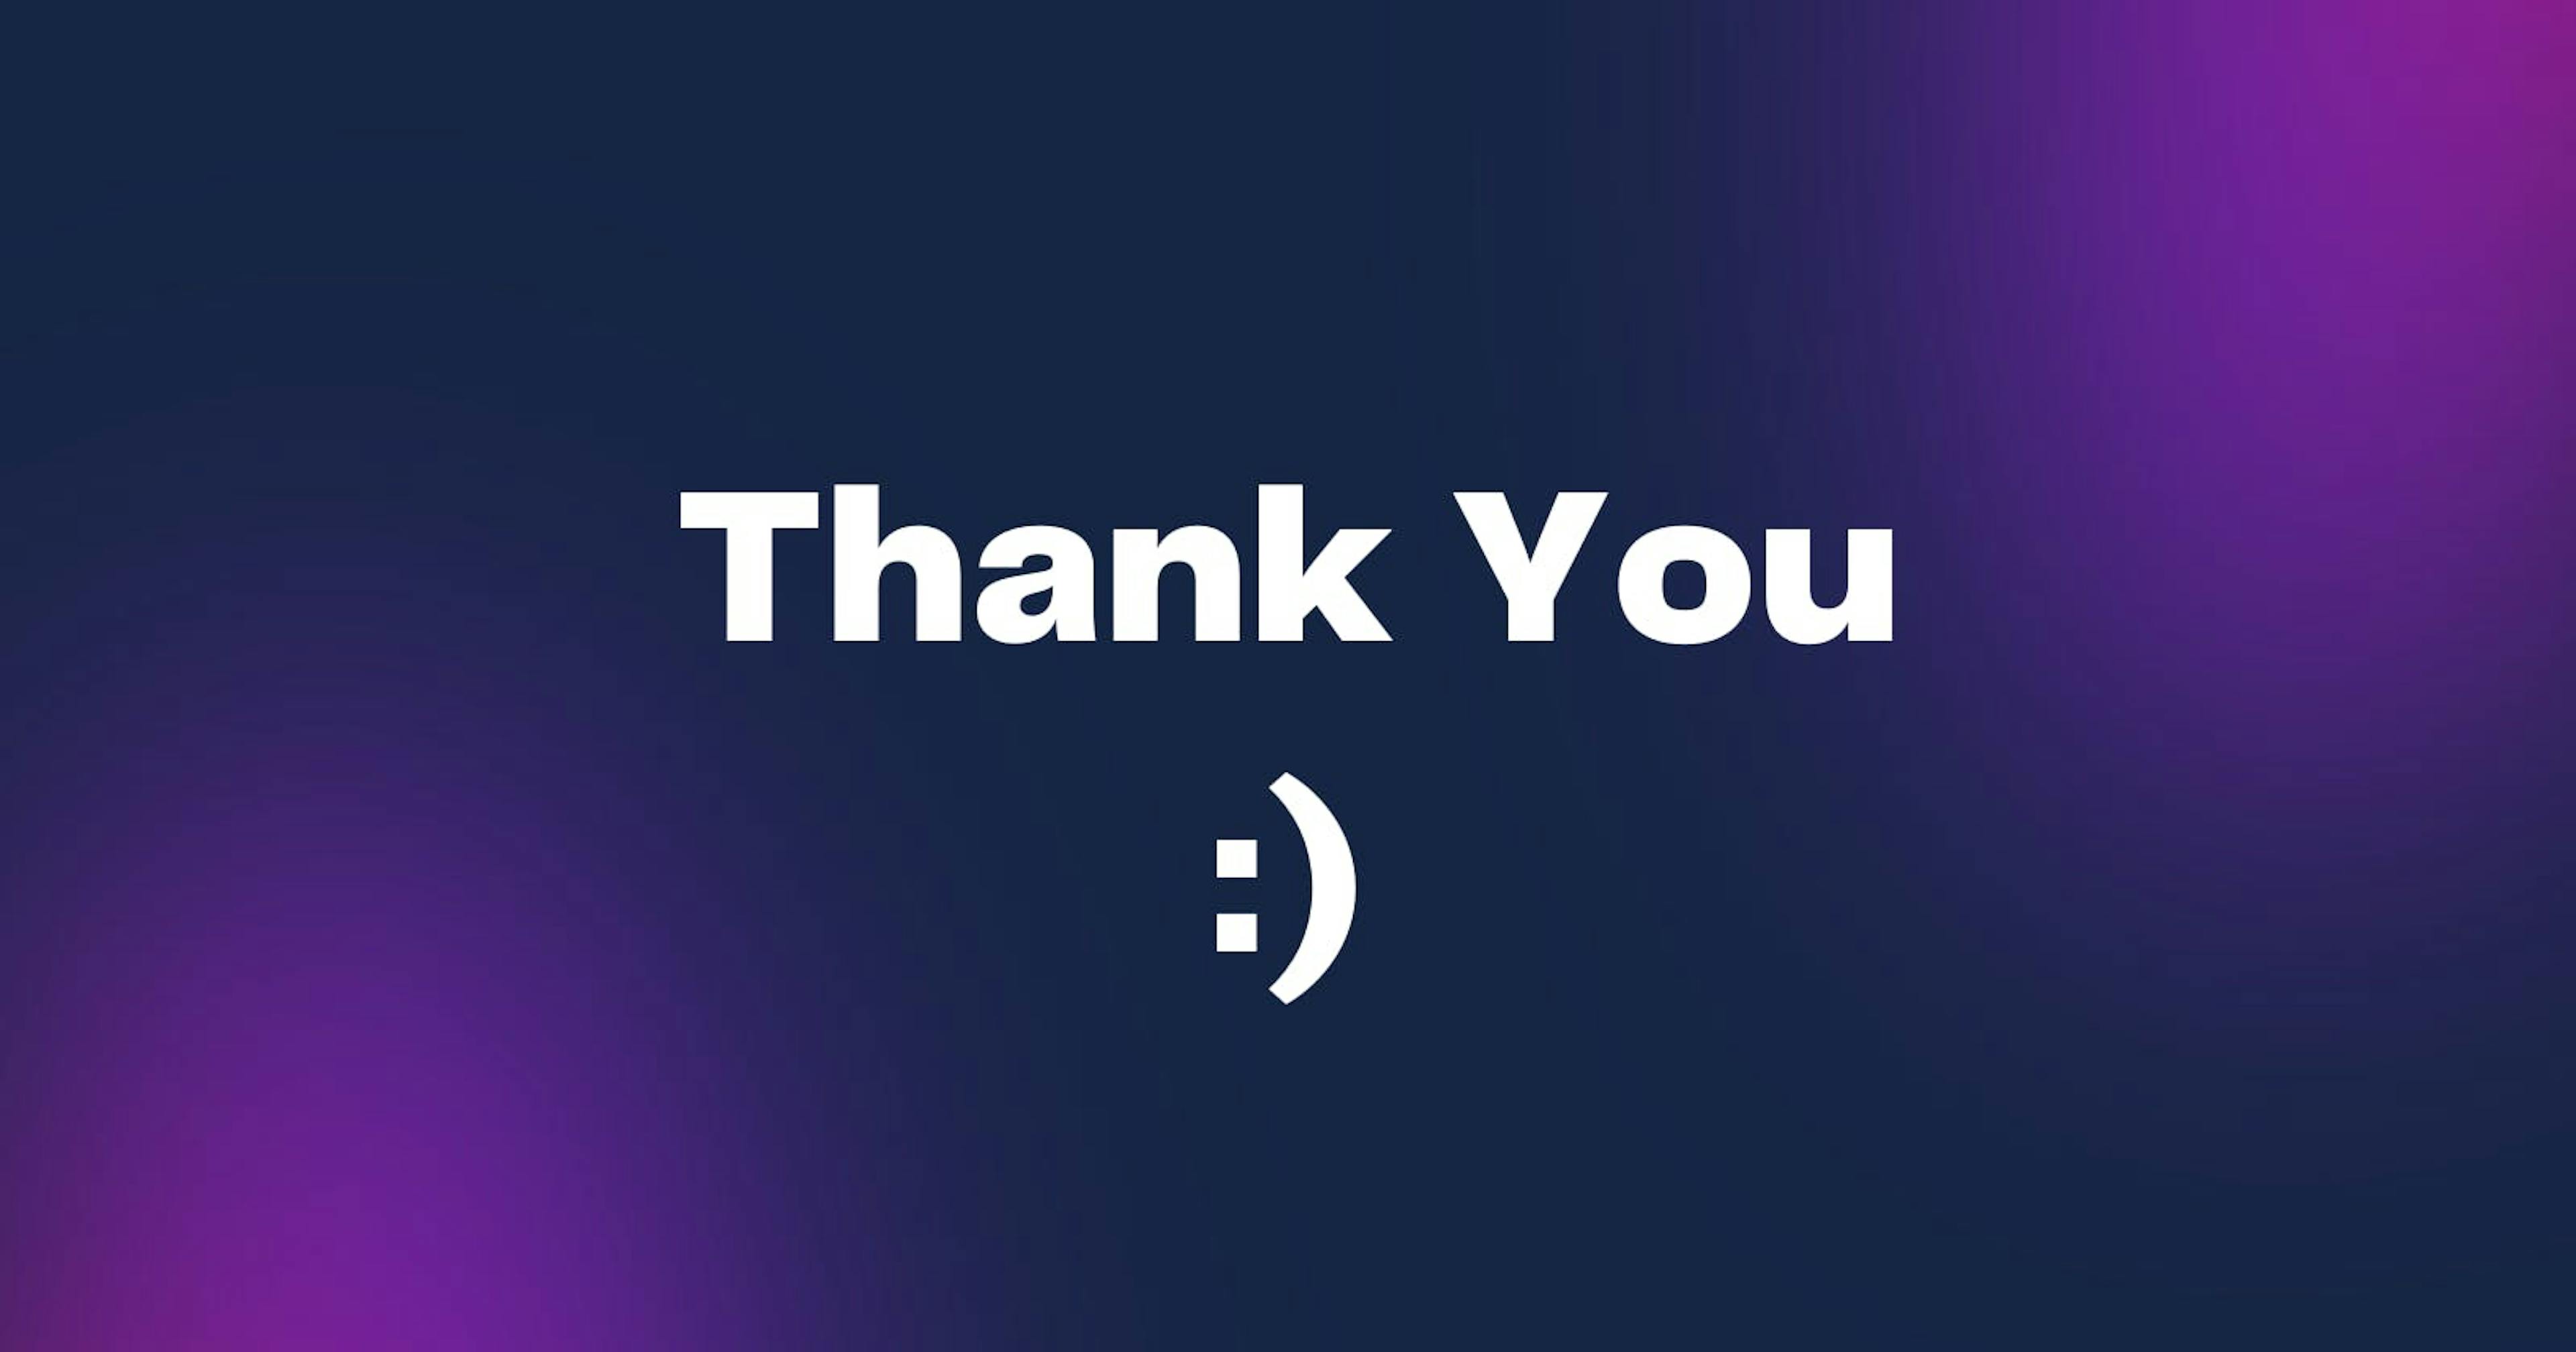 "Thank You :) text on a dark blue and purple gradient background."